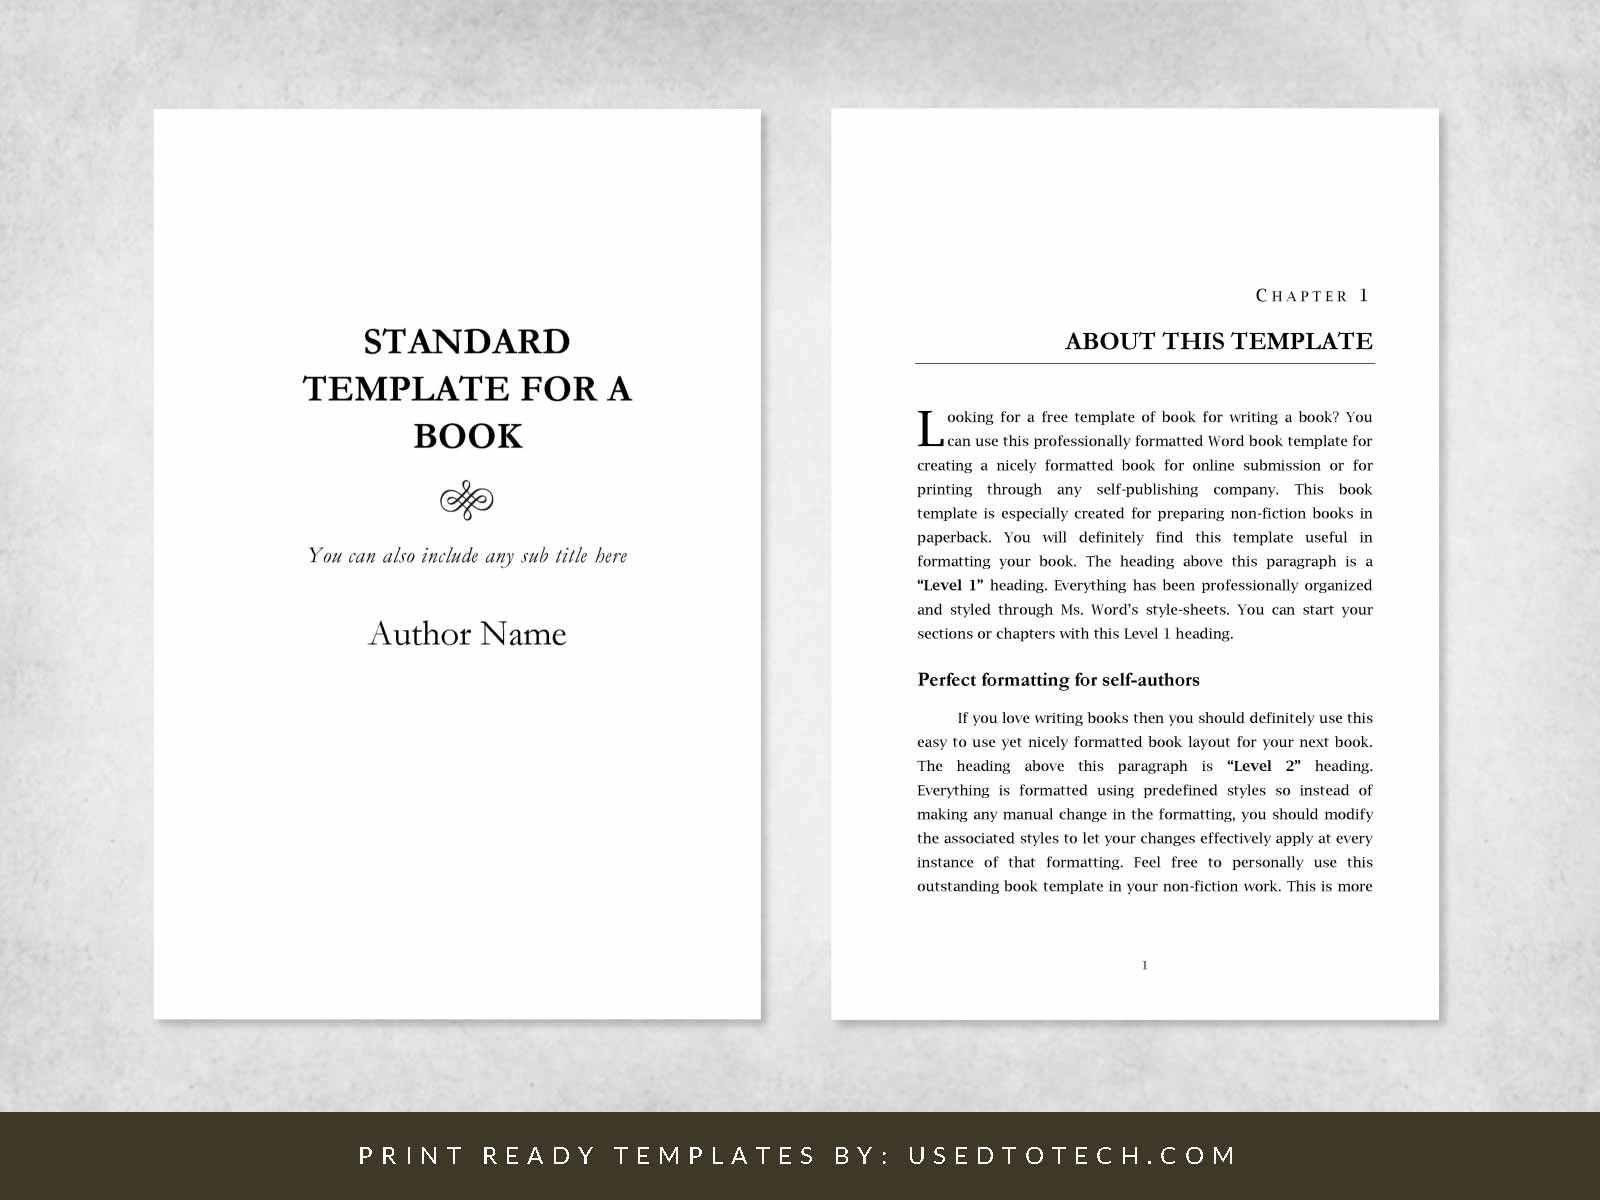 Standard Word template for a book 6x9